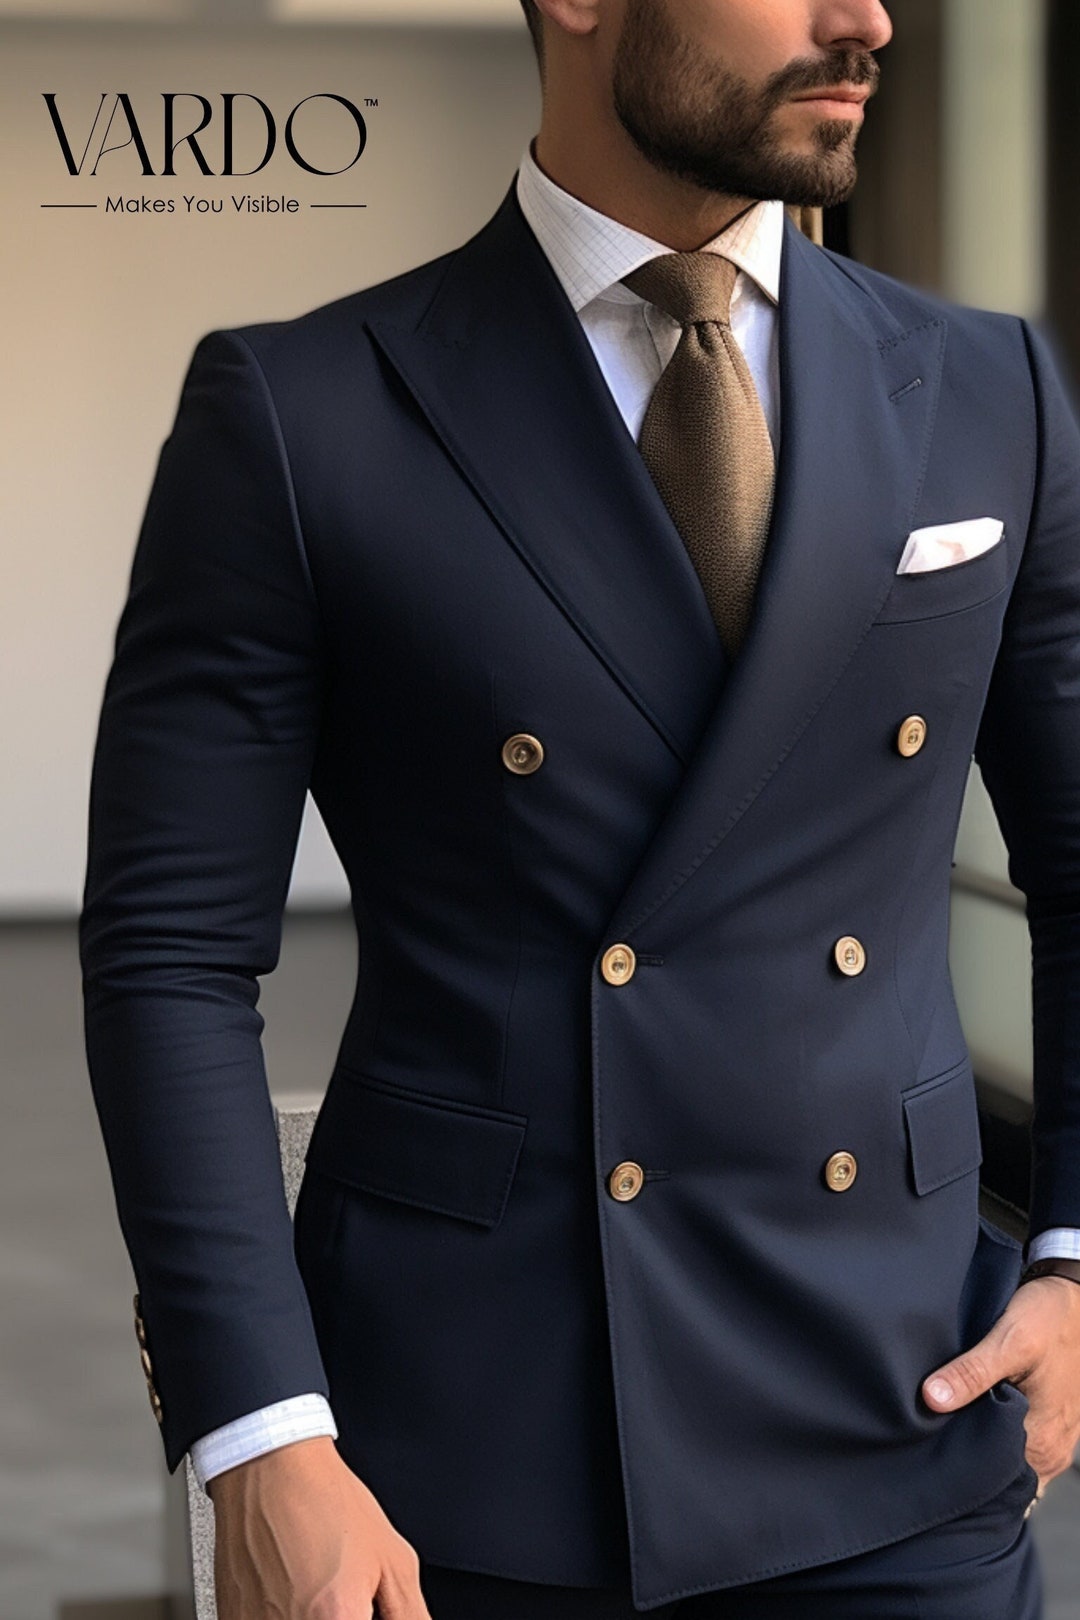 Classic Navy Blue Double-breasted Suit for Men Timeless Formal Attire ...